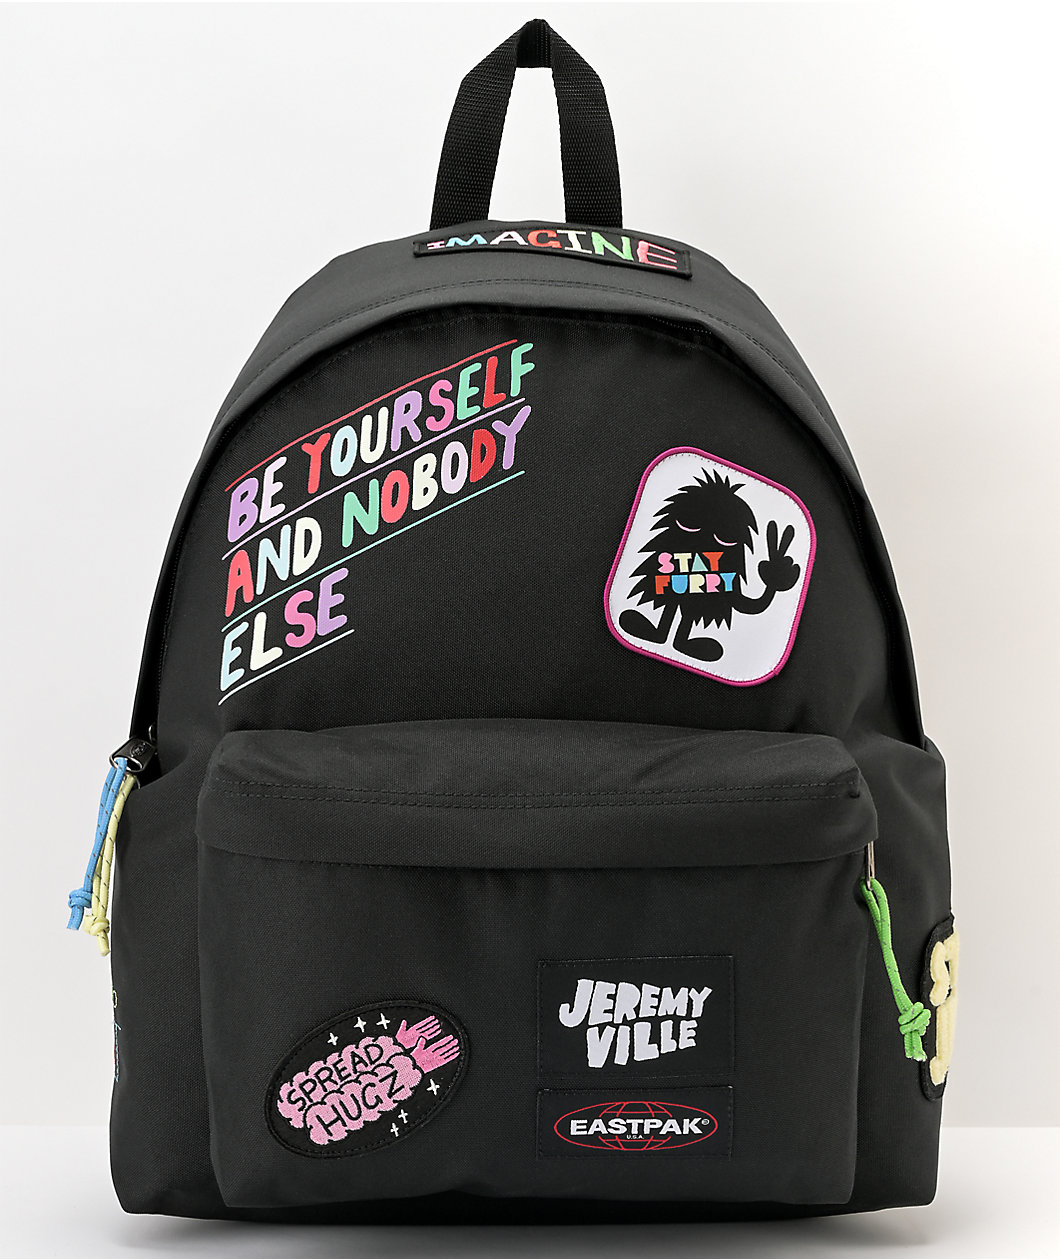 Waarneembaar Hoelahoep Fragiel Classical Eastpak x Jeremyville Patched Black Padded Pak'r Backpack sales  hot | Shipping in 24h at outletussports.com